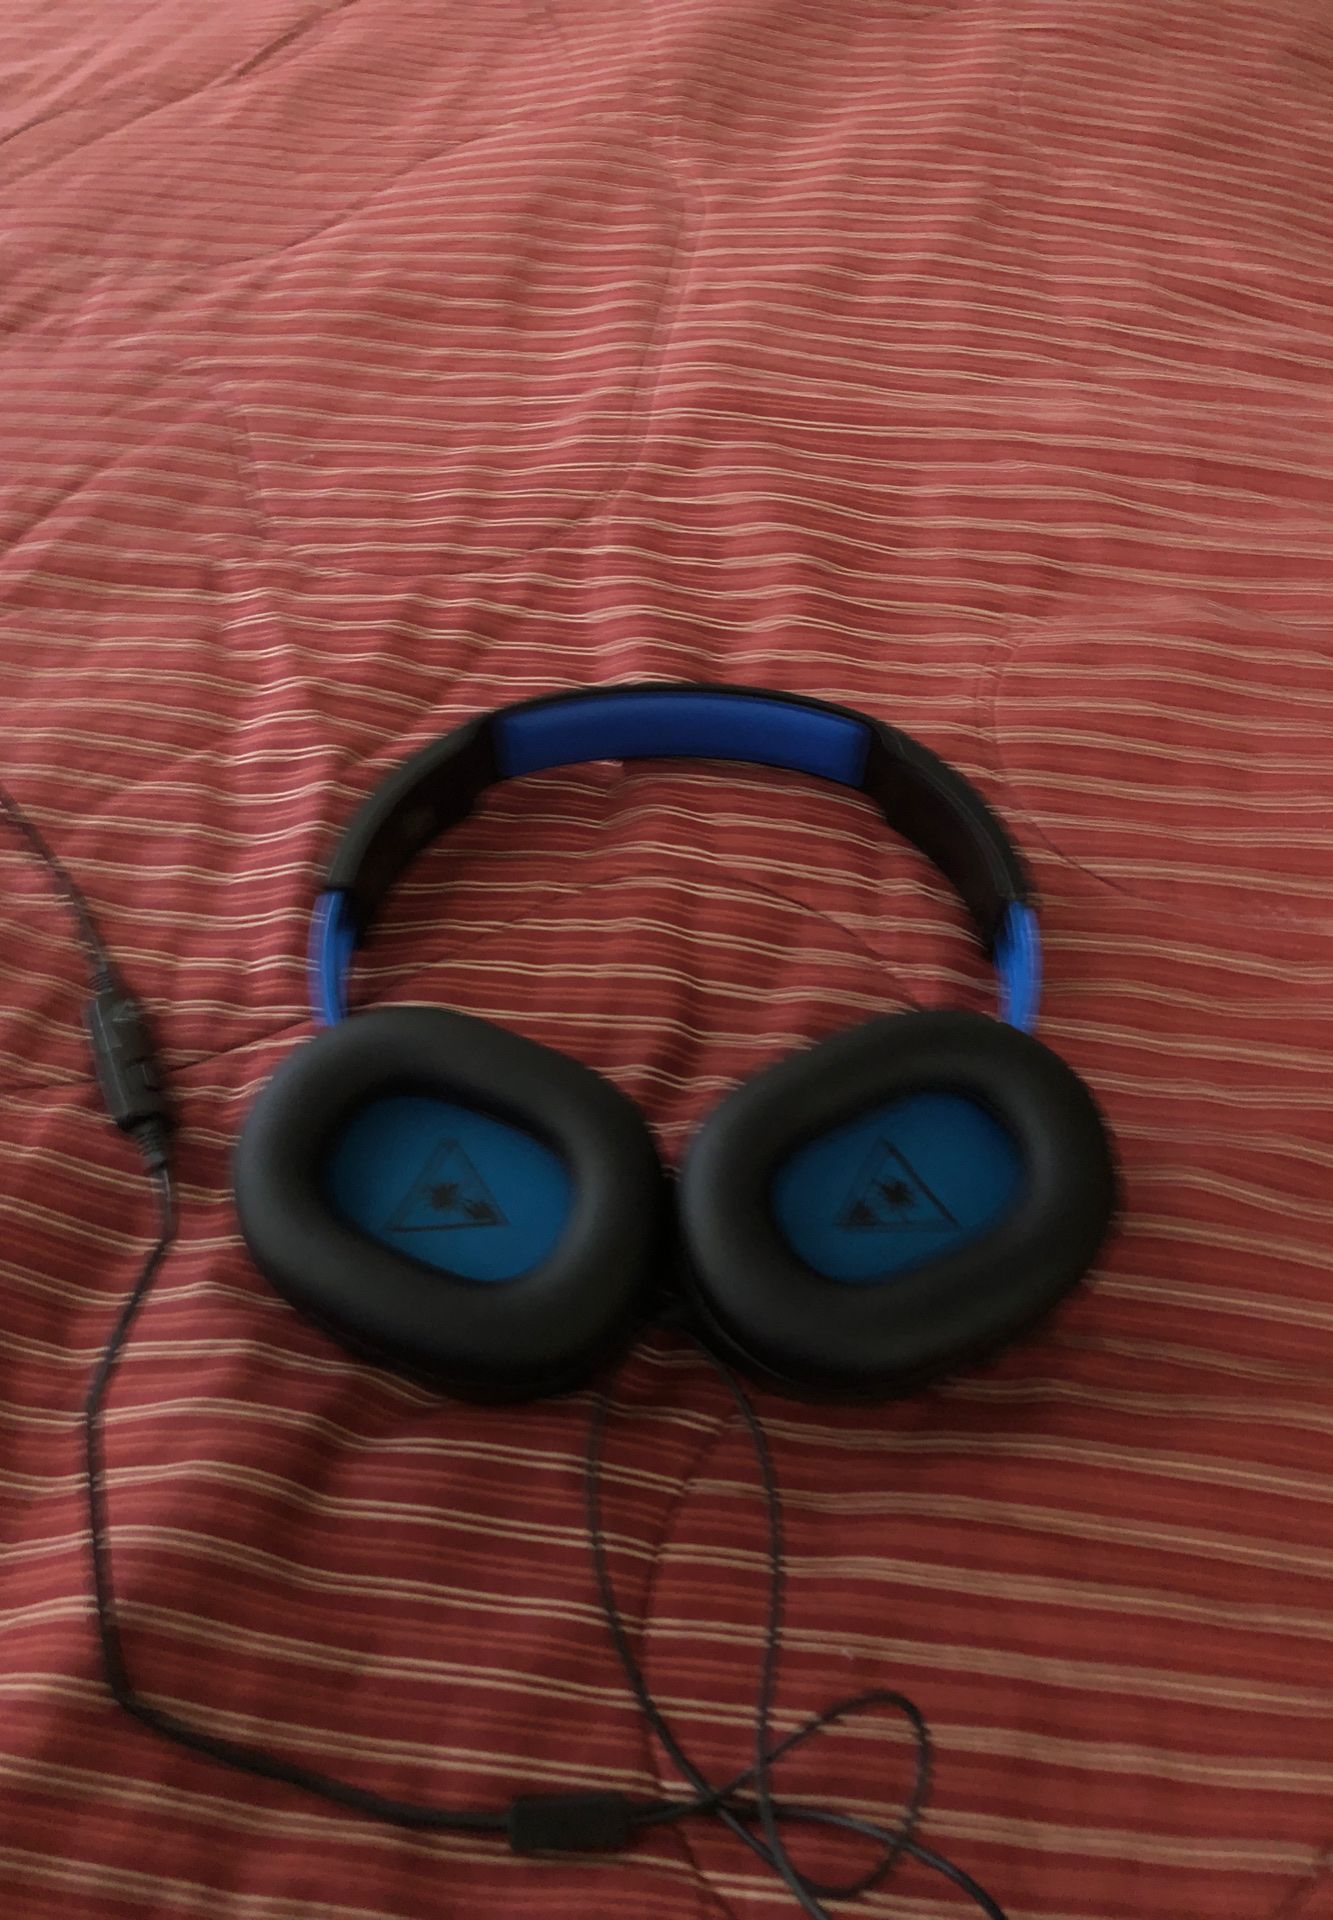 Turtle Beach headset no mic but it works good